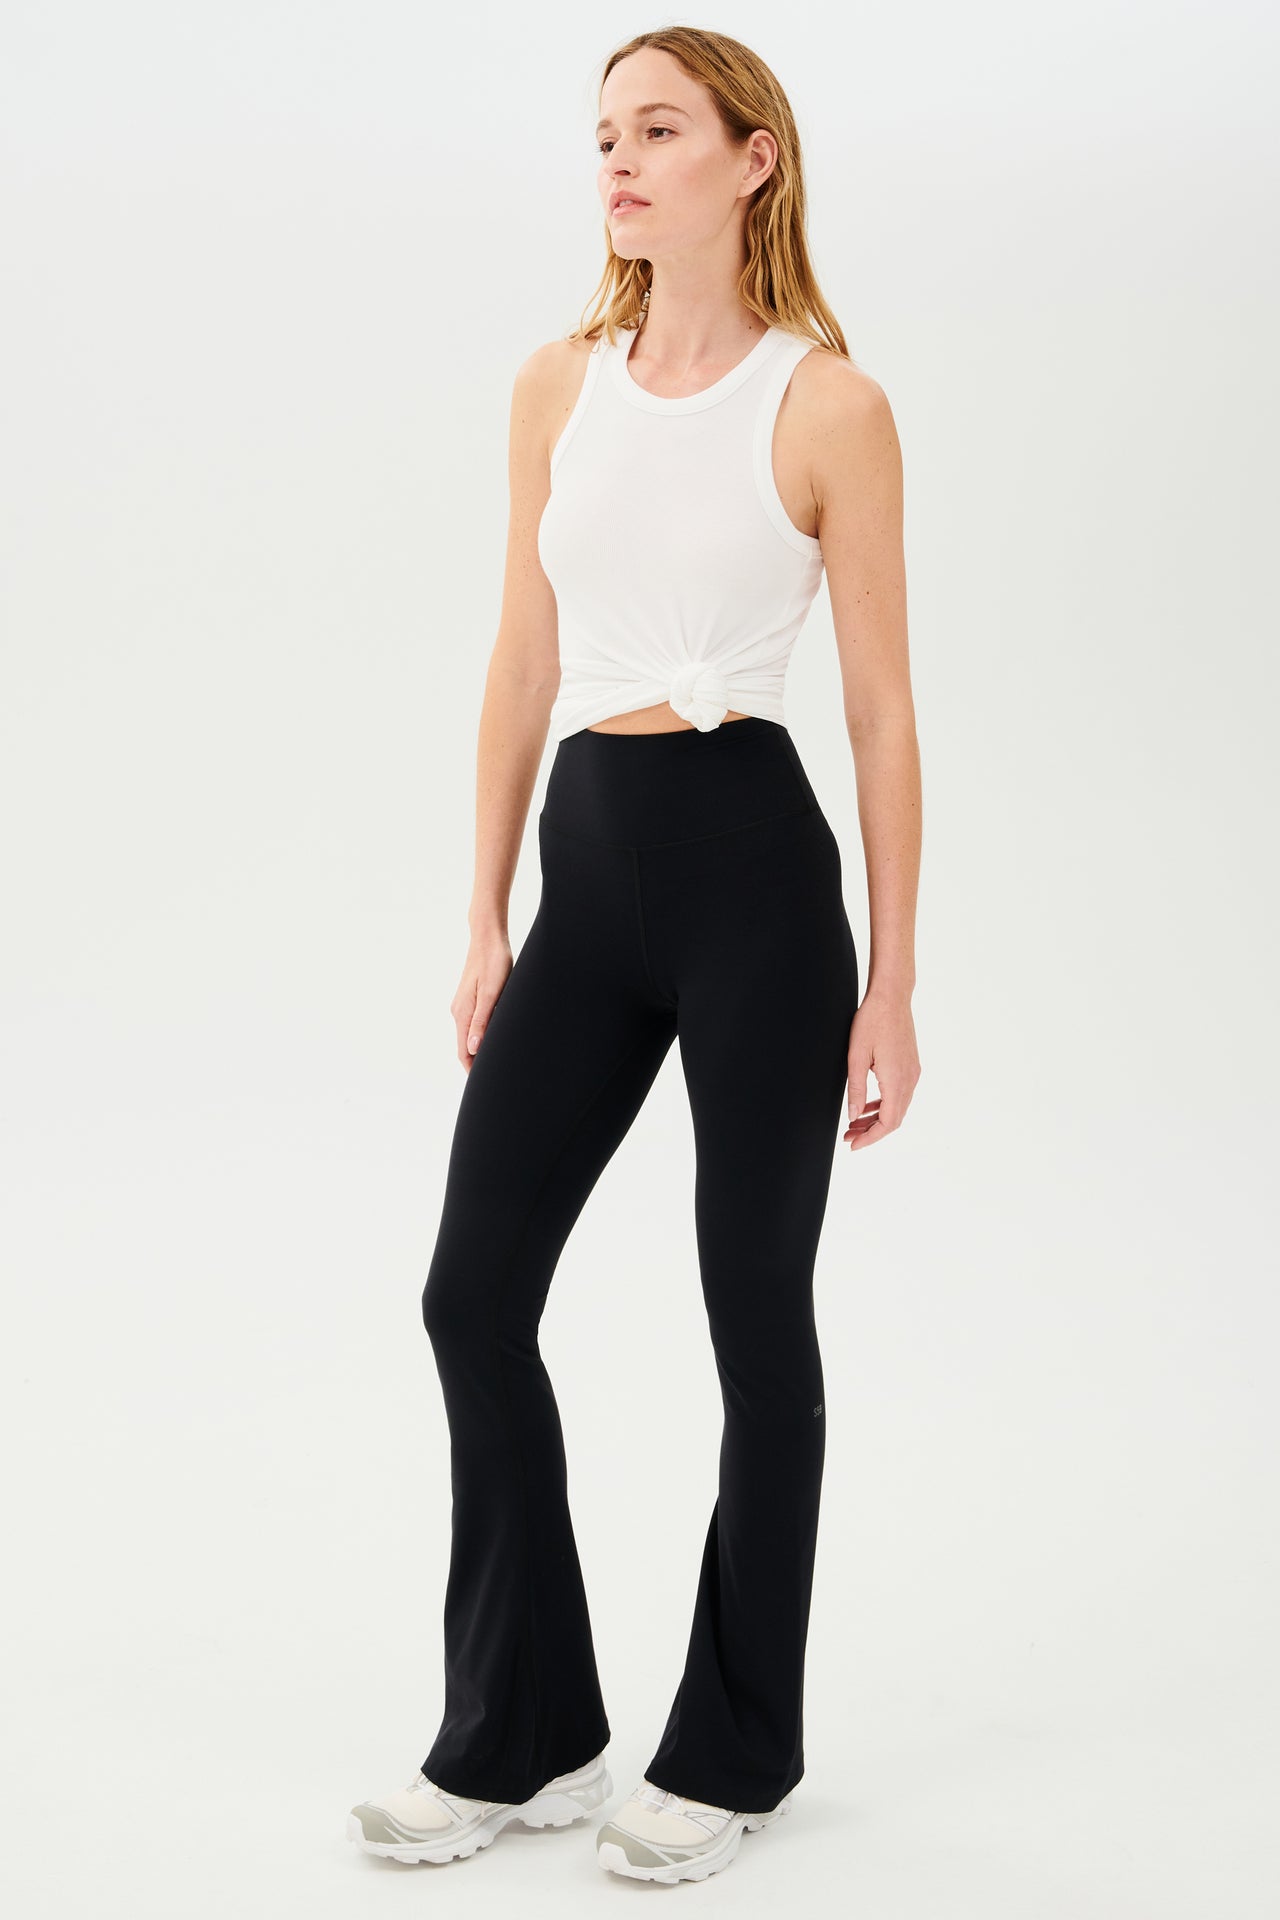 A woman wearing SPLITS59 Raquel High Waist Airweight Flare leggings in black and a white tank top.